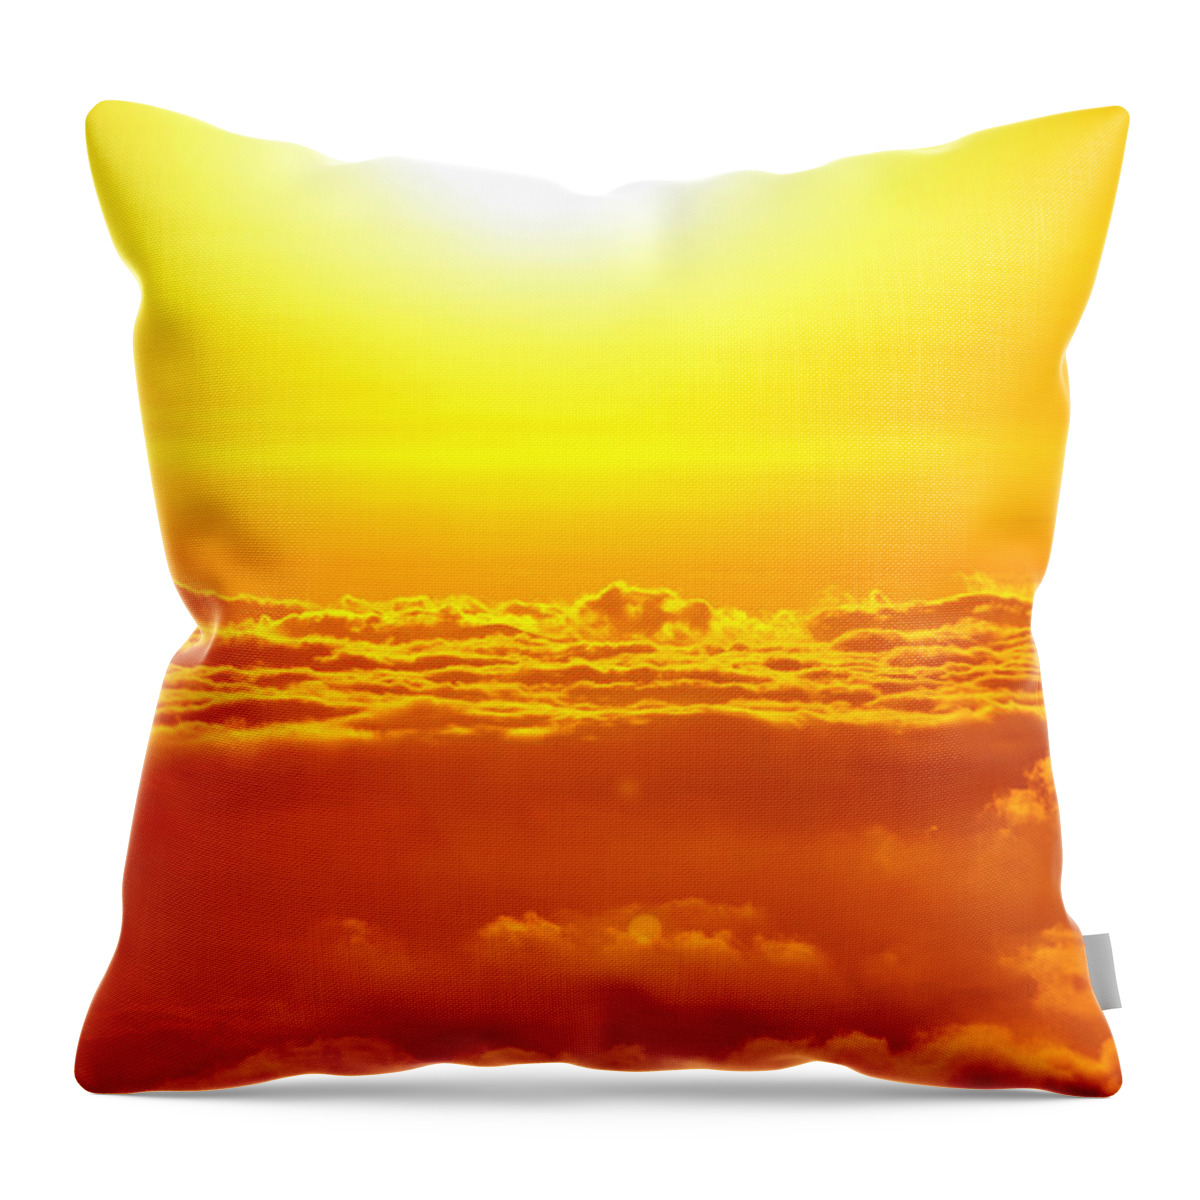 Scenics Throw Pillow featuring the photograph Sunrise In Sea Of Clouds #1 by 4x-image